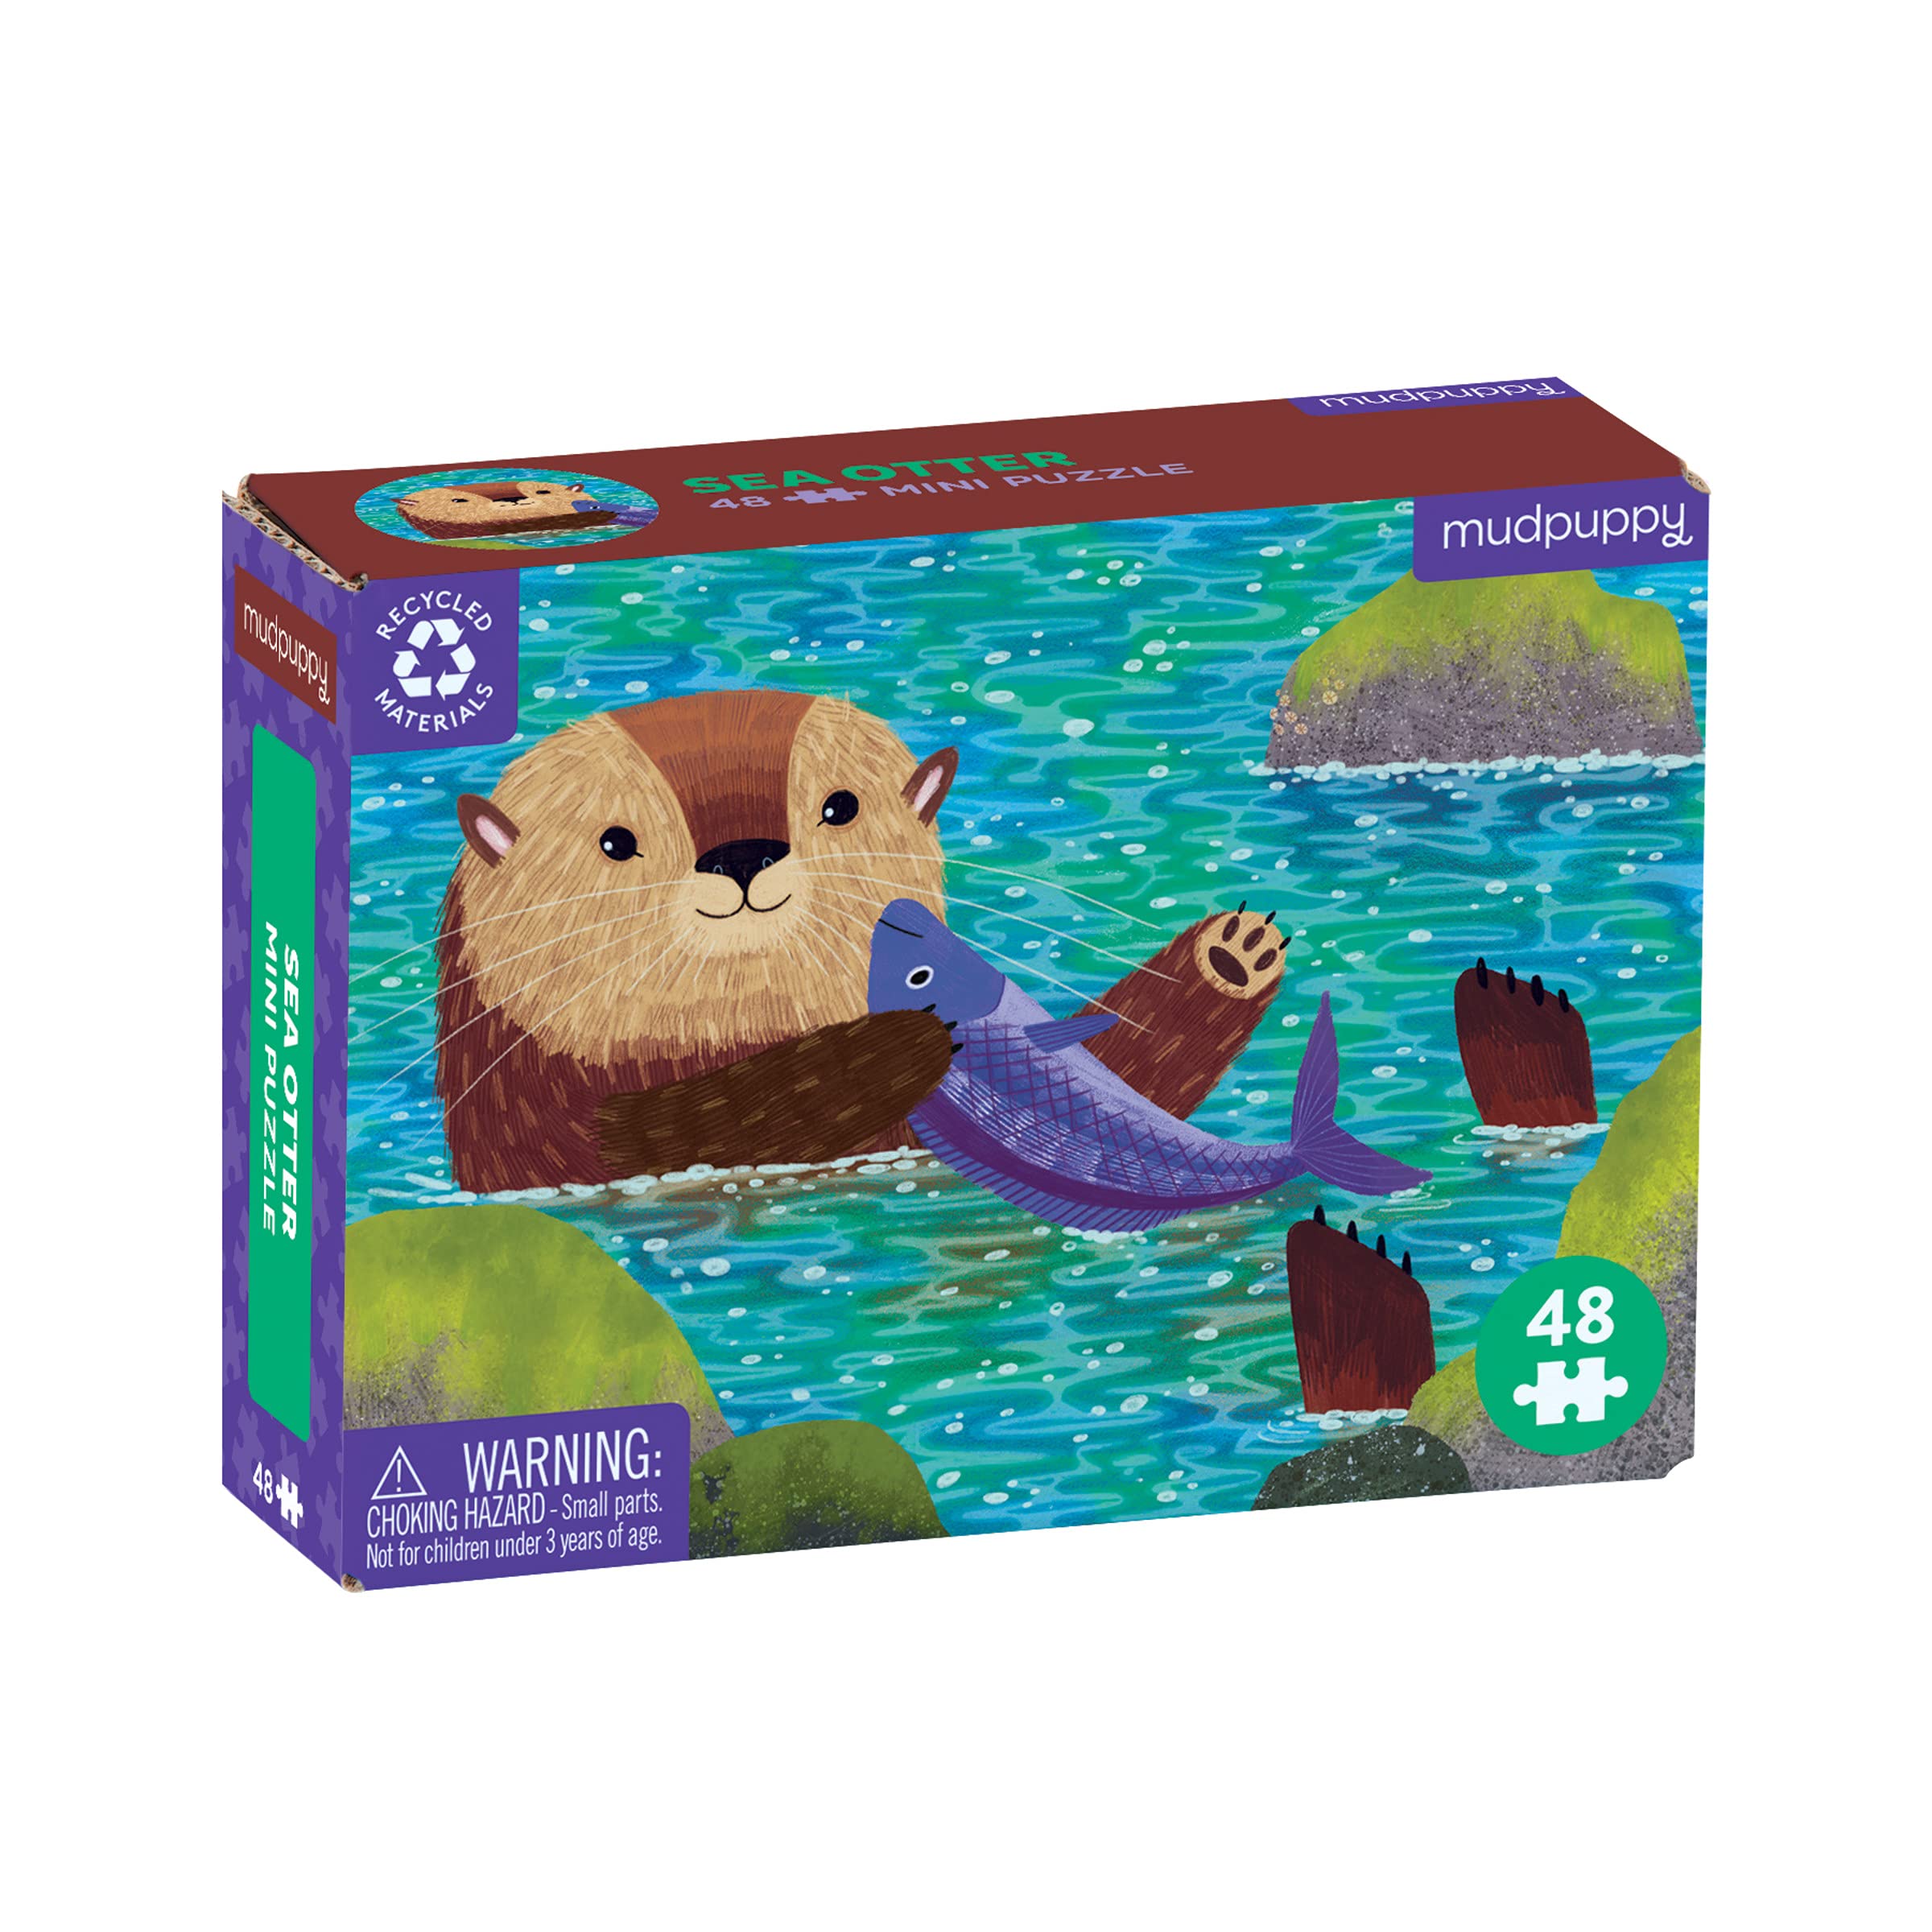 Mudpuppy Sea Otter Mini Puzzle, 48 Pieces, 8” x 5.75” – Perfect Family Puzzle for Ages 4+ – Features a Colorful Illustration of a Sea Otter, Informational Insert Included